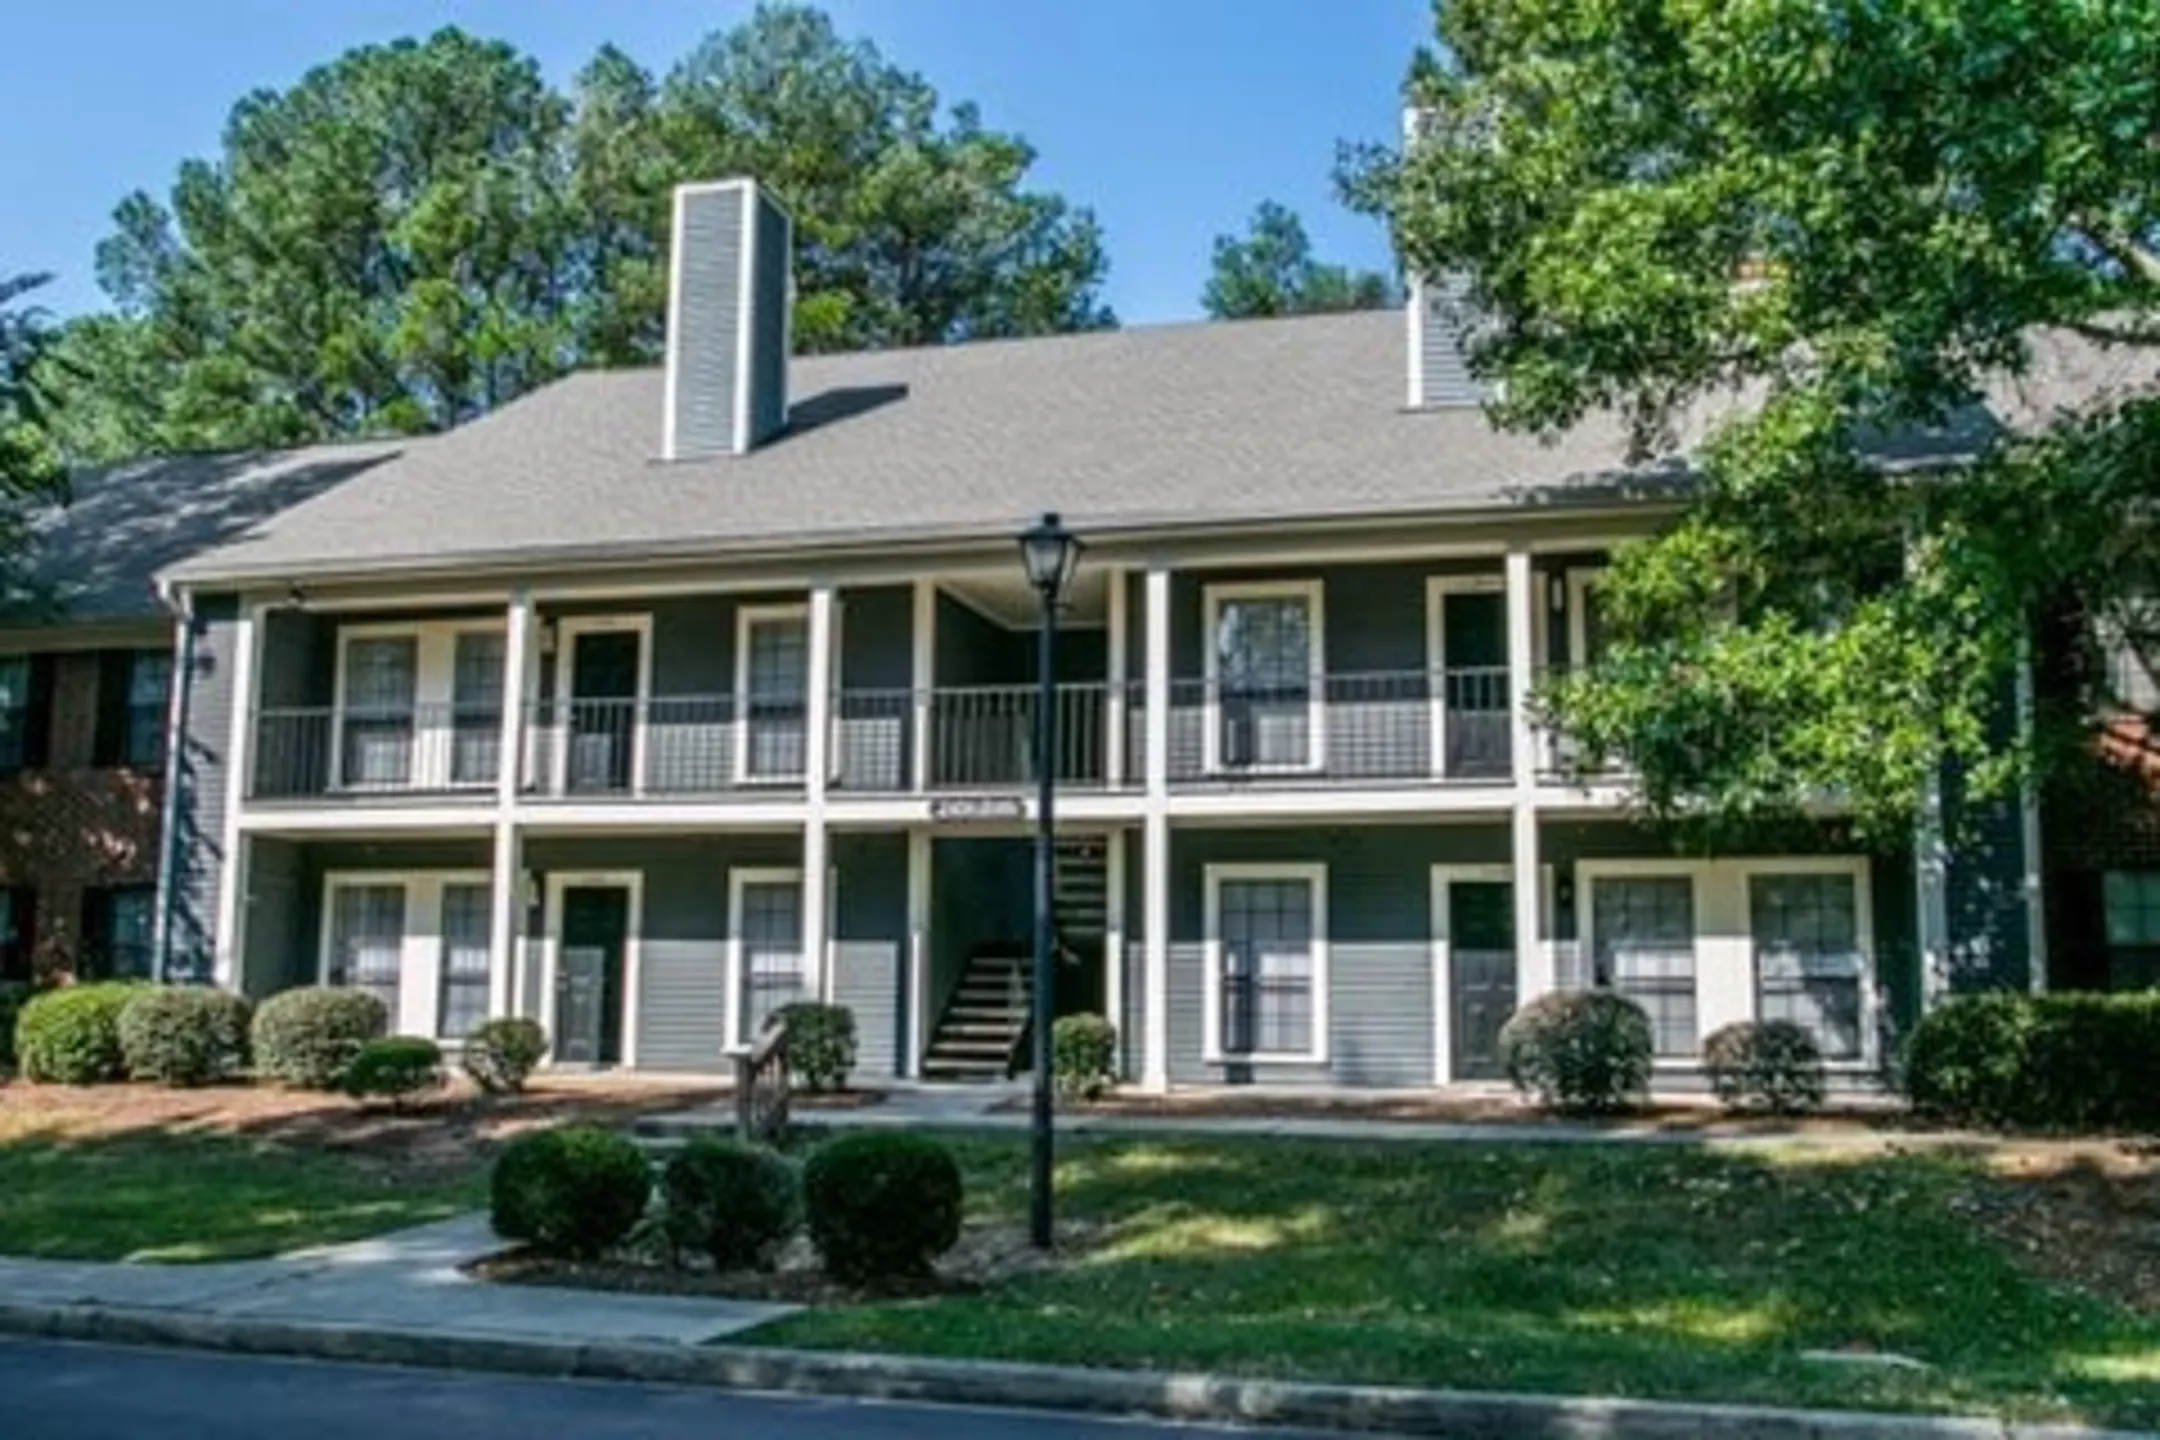 Building - St. Andrews Apartments & Townhomes - Columbia, SC